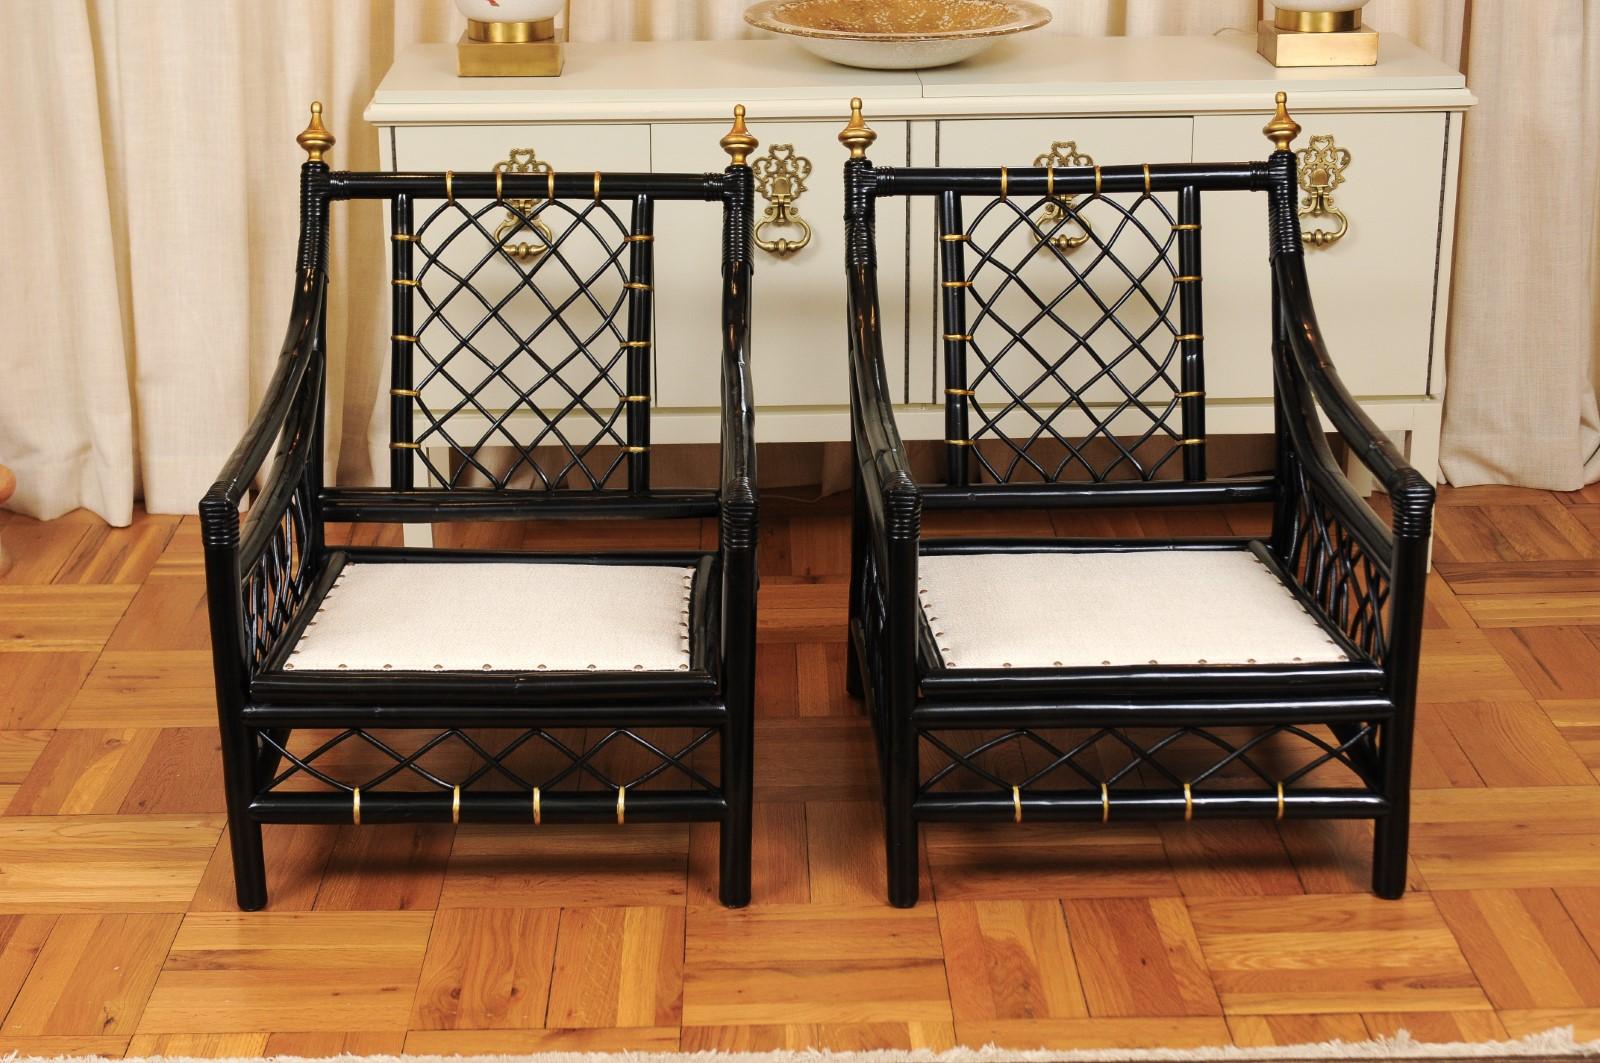 Elegant Restored Pair of Throne Loungers by Willow and Reed, circa 1955 For Sale 9